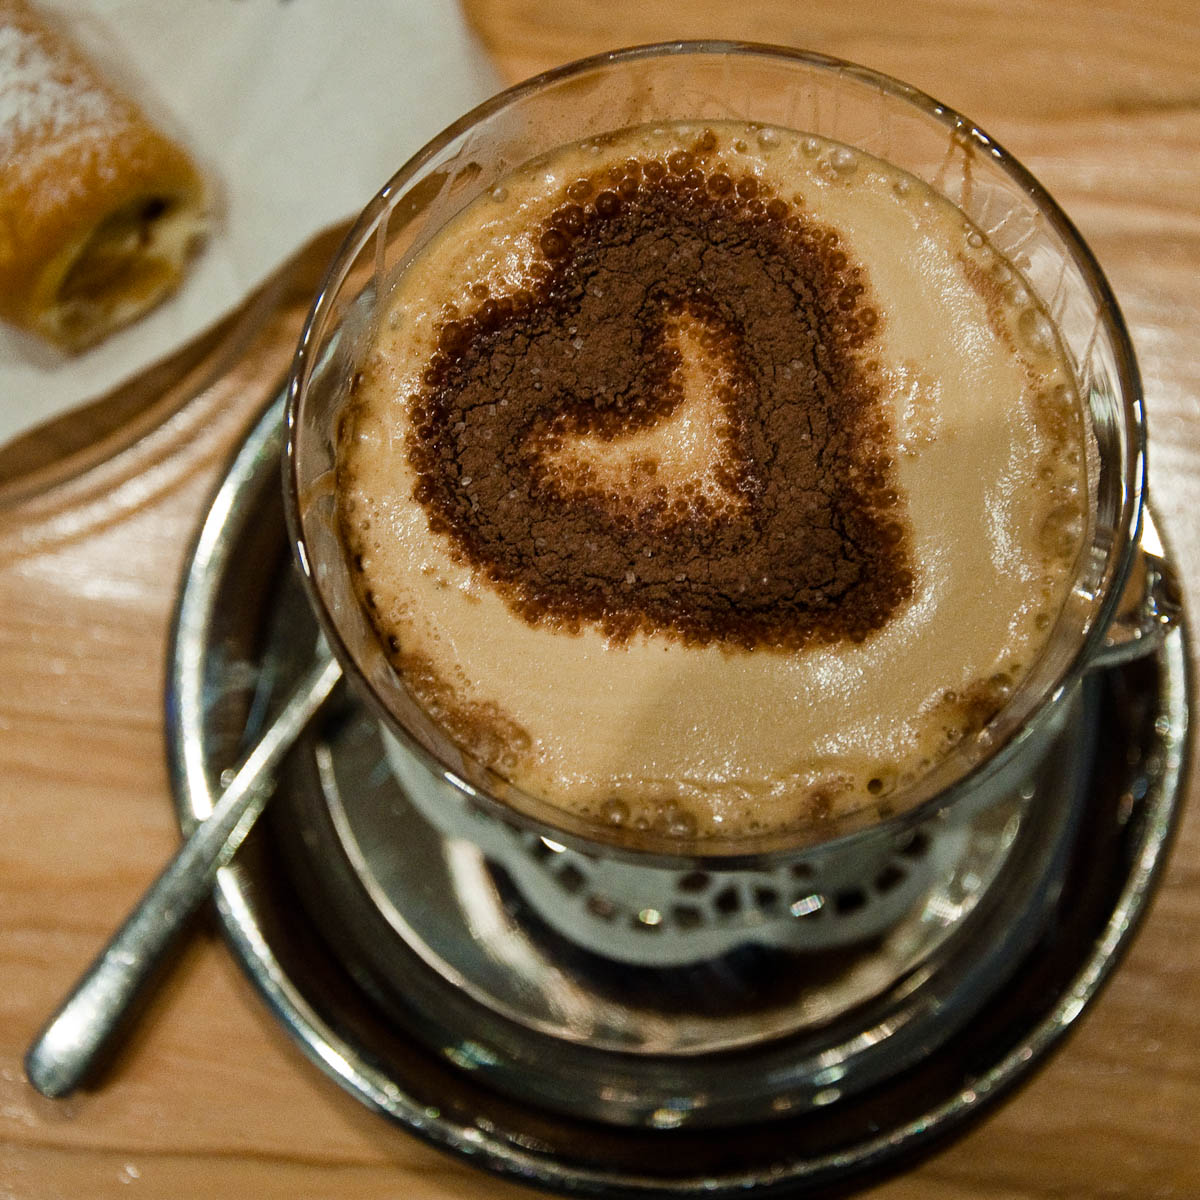 Cafe souffle, Cafe Olimpico, Vicenza, Italy - www.rossiwrites.com